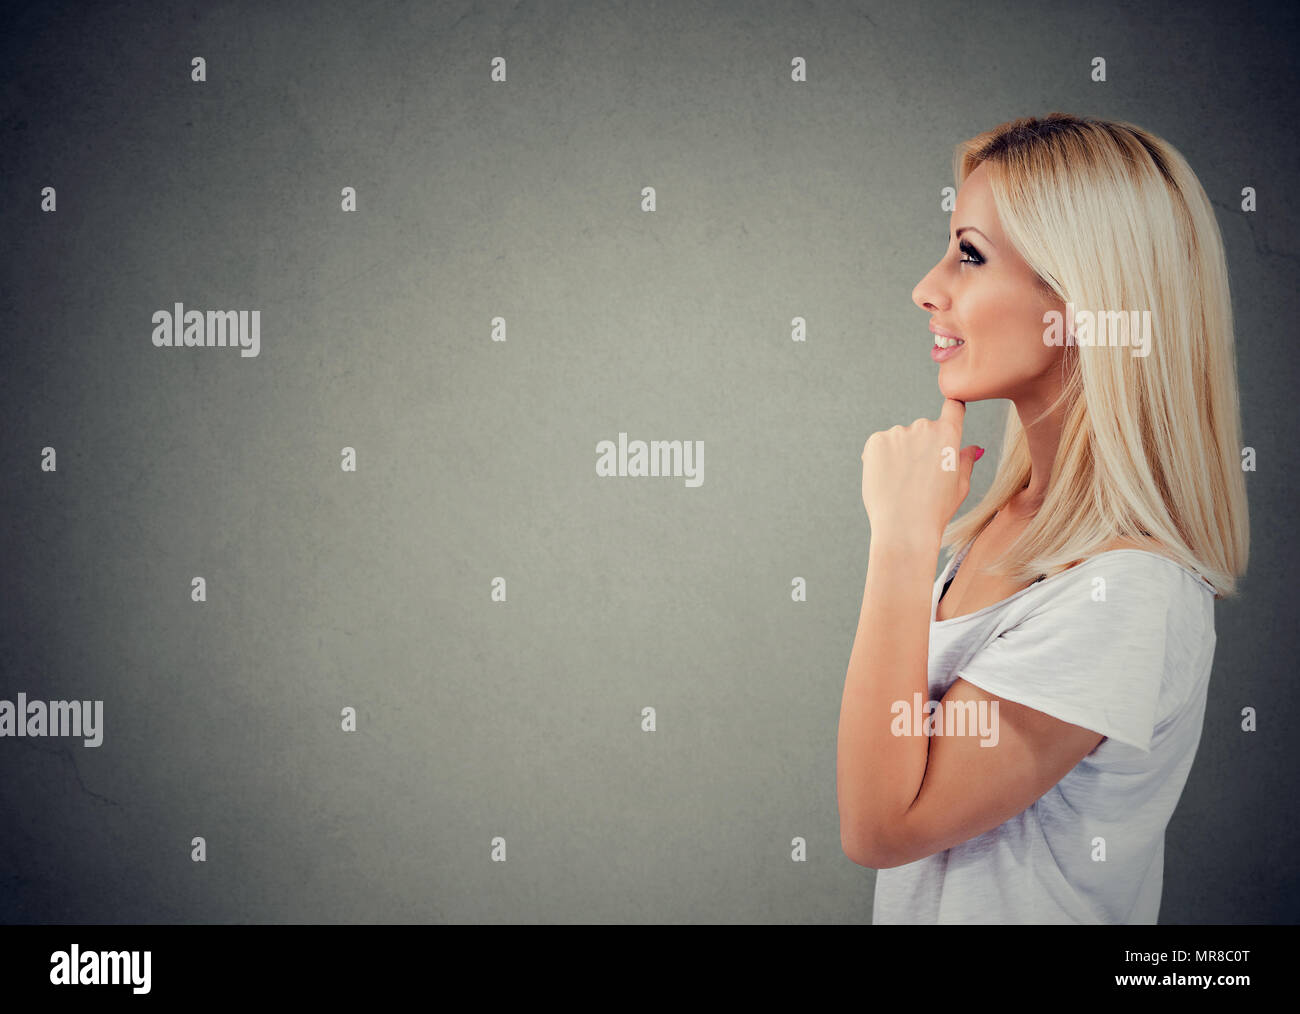 Side view of a pretty blonde woman in contemplation looking away thinking of idea on gray background. Stock Photo